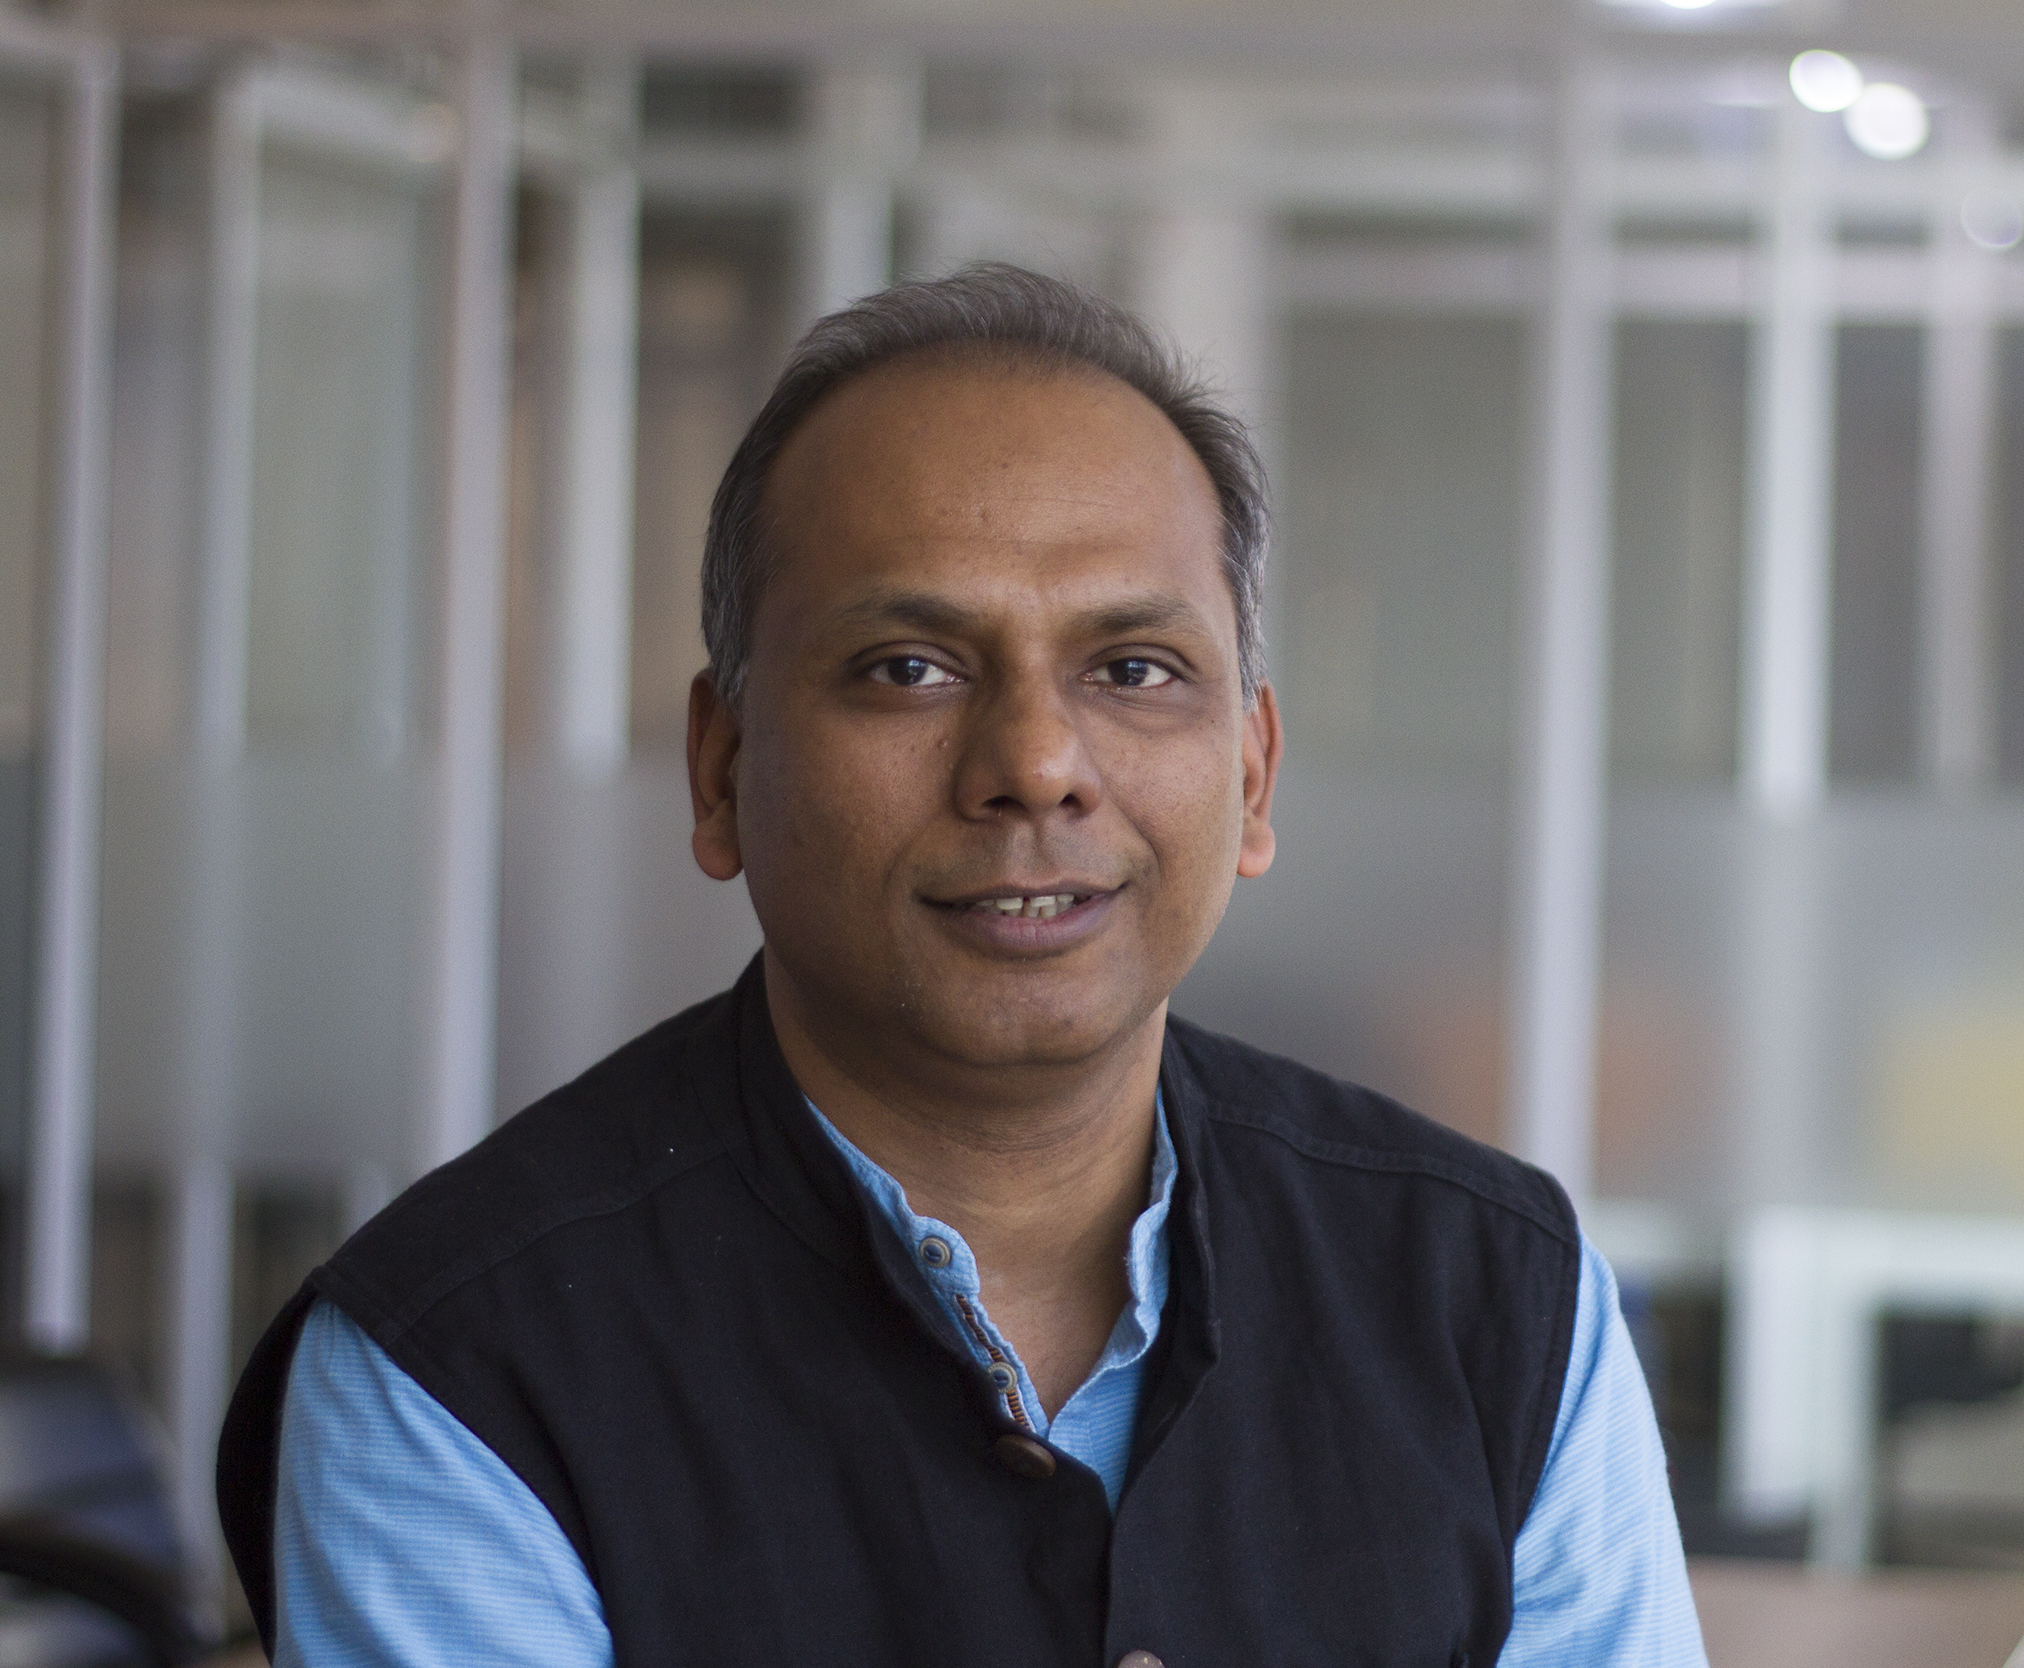 pi Ventures Completes First Close Of Its Fund II At INR 300 Cr To Invest In Deeptech Startups Summary The second fund was launched in March 2021 with a target corpus of INR 565 Cr ($75 Mn) The present fund plans to invest in 20-25 startups in the fields of blockchain, spacetech, biotech, and material science besides deeptech In 2021, about $6.2 Bn had been raised by 62 funds across categories (VC, Debt, CVC, Micro VCs) to back the booming Indian startup economy Early-stage venture capital firm pi Ventures has completed the first close of its Fund II at INR 300 Cr ($40 Mn).